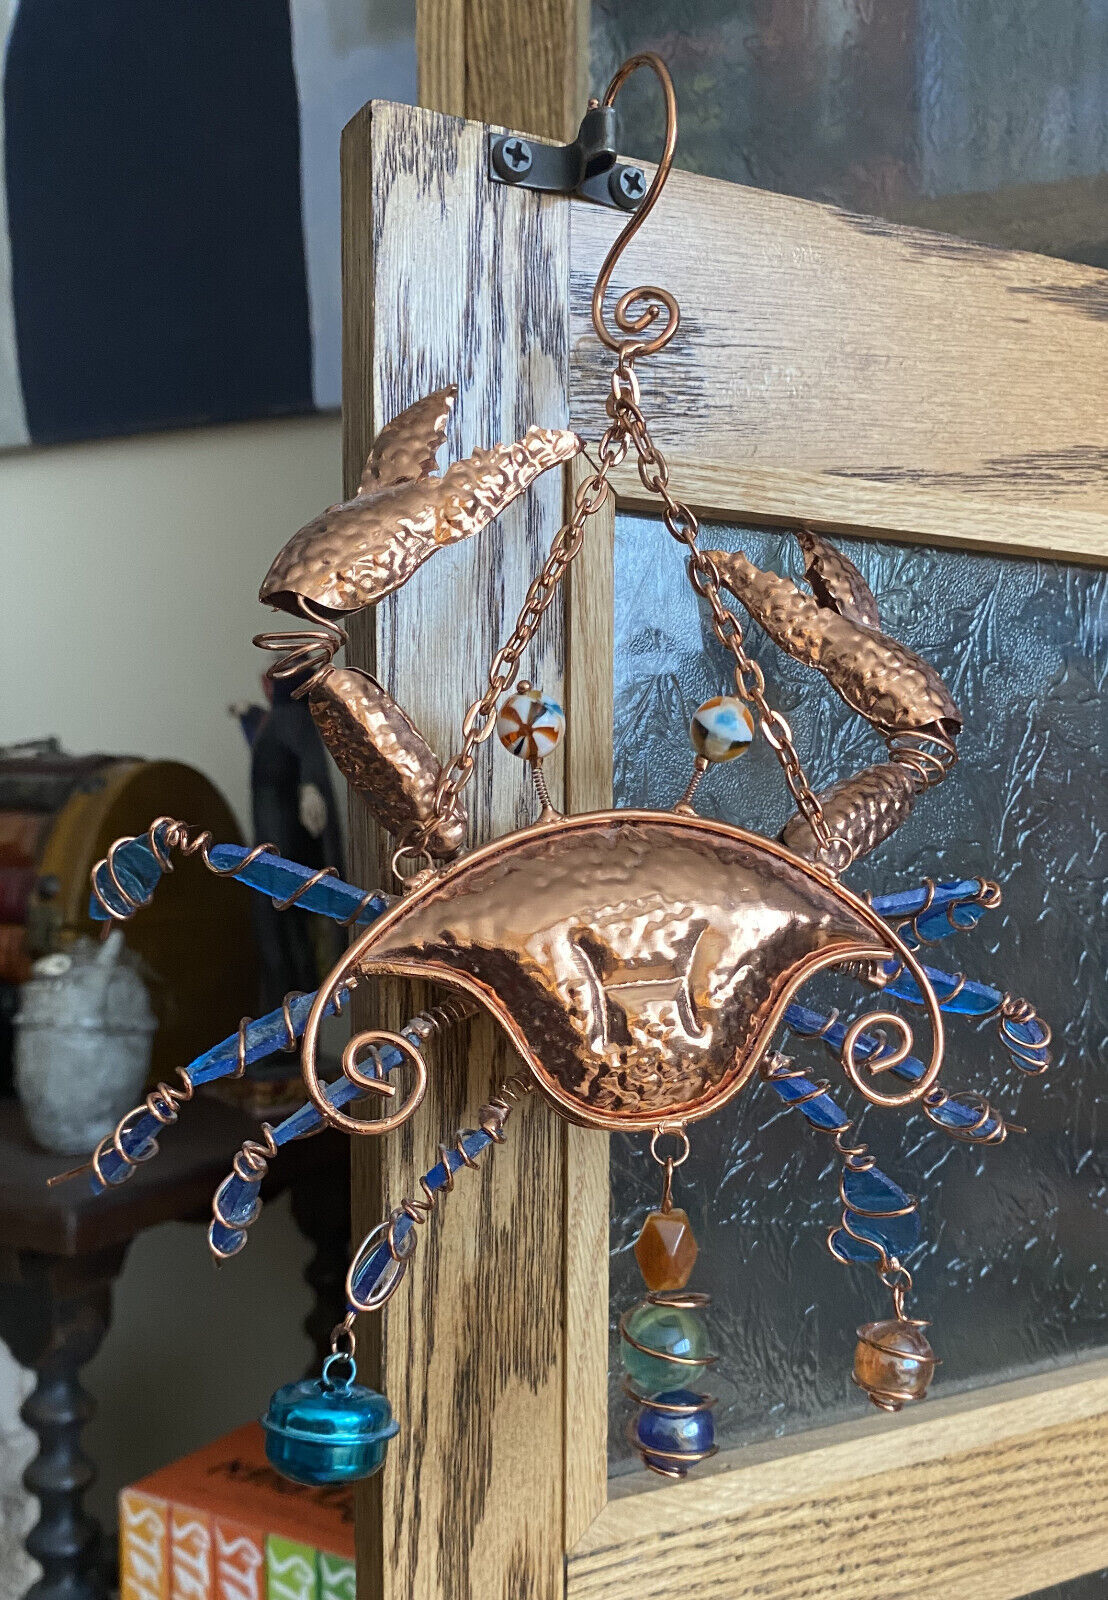 Hammered Copper Wire and Bead Crab Wall Hanging Kitchen / Bathroom Decor Art